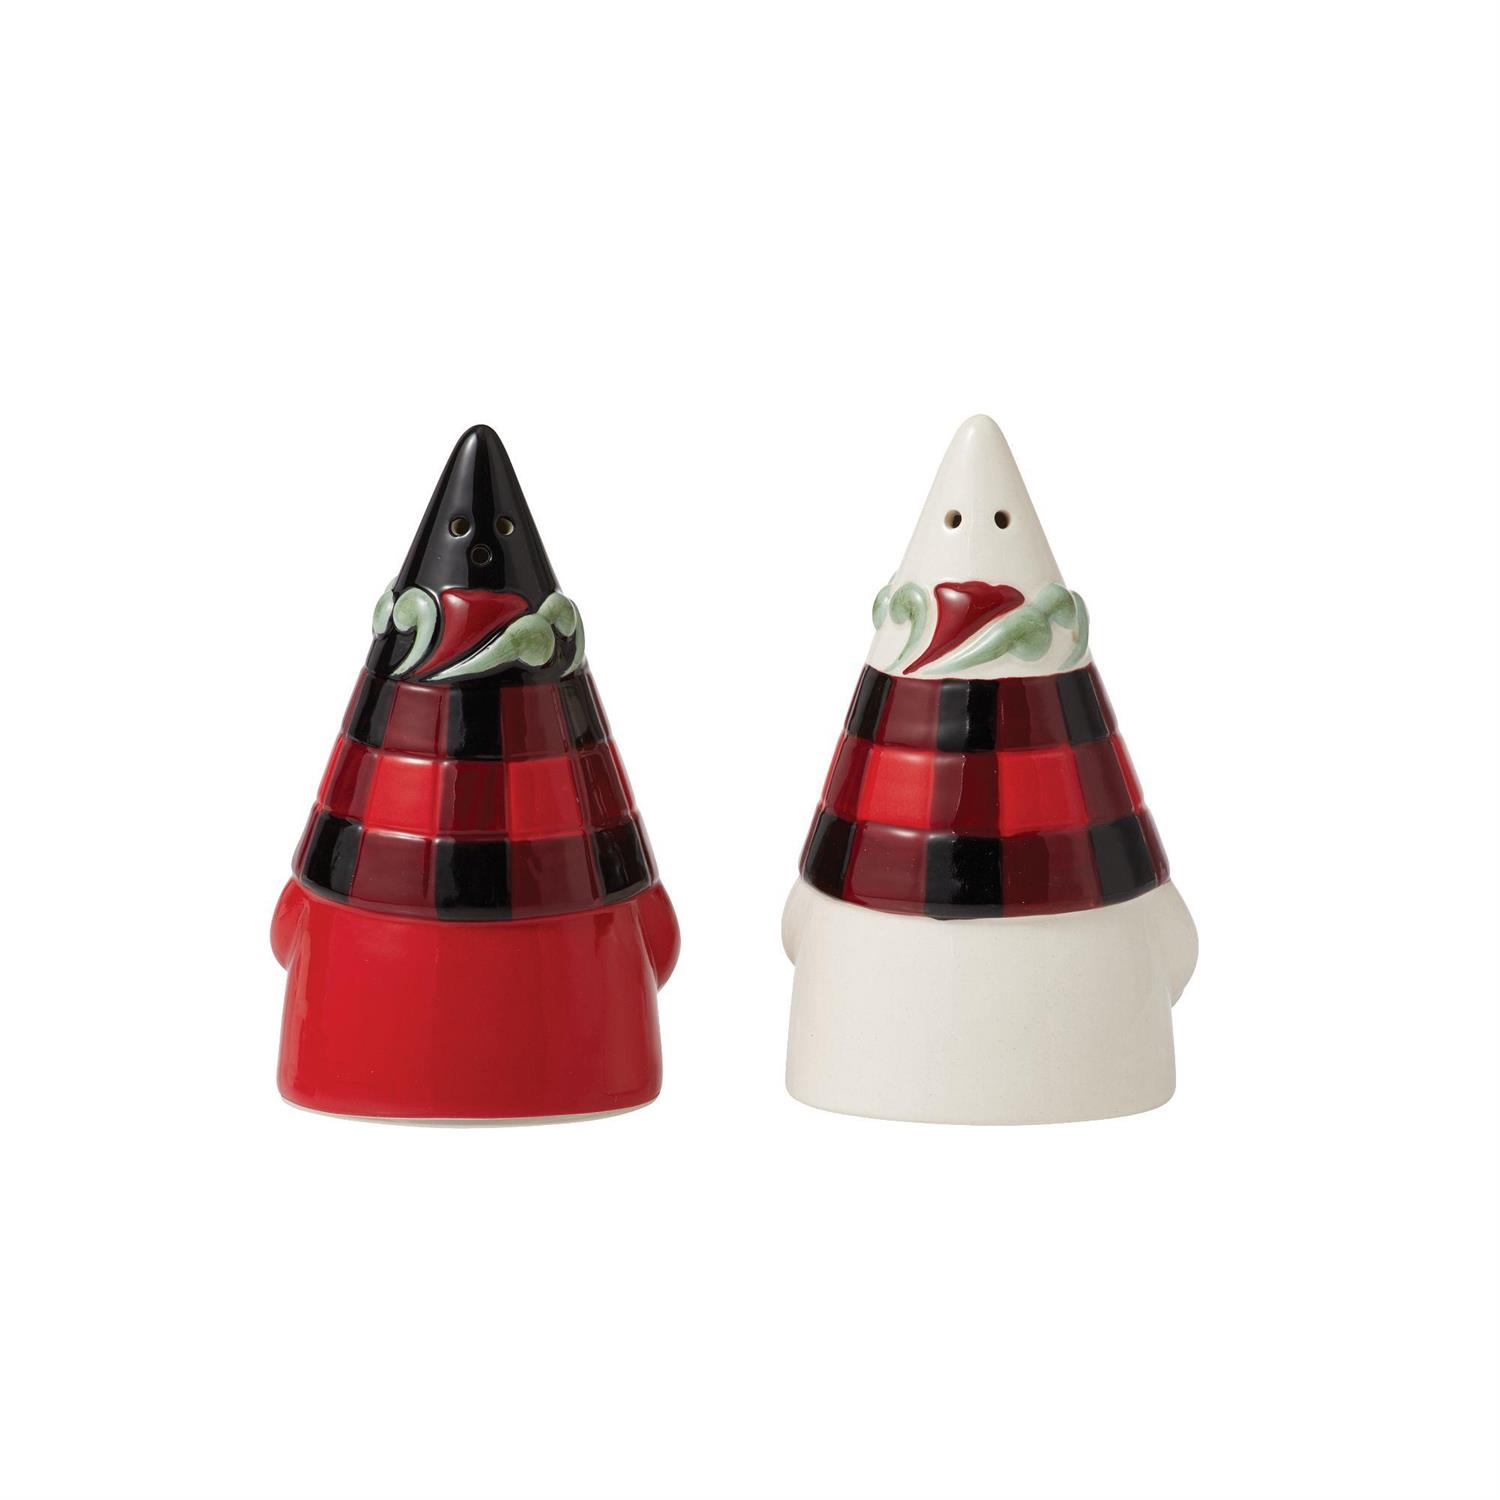 Enesco Gifts Jim Shore Heartwood Creek Highland Glen Gnome Salt And Pepper Set Free Shipping Iveys Gifts And Decor